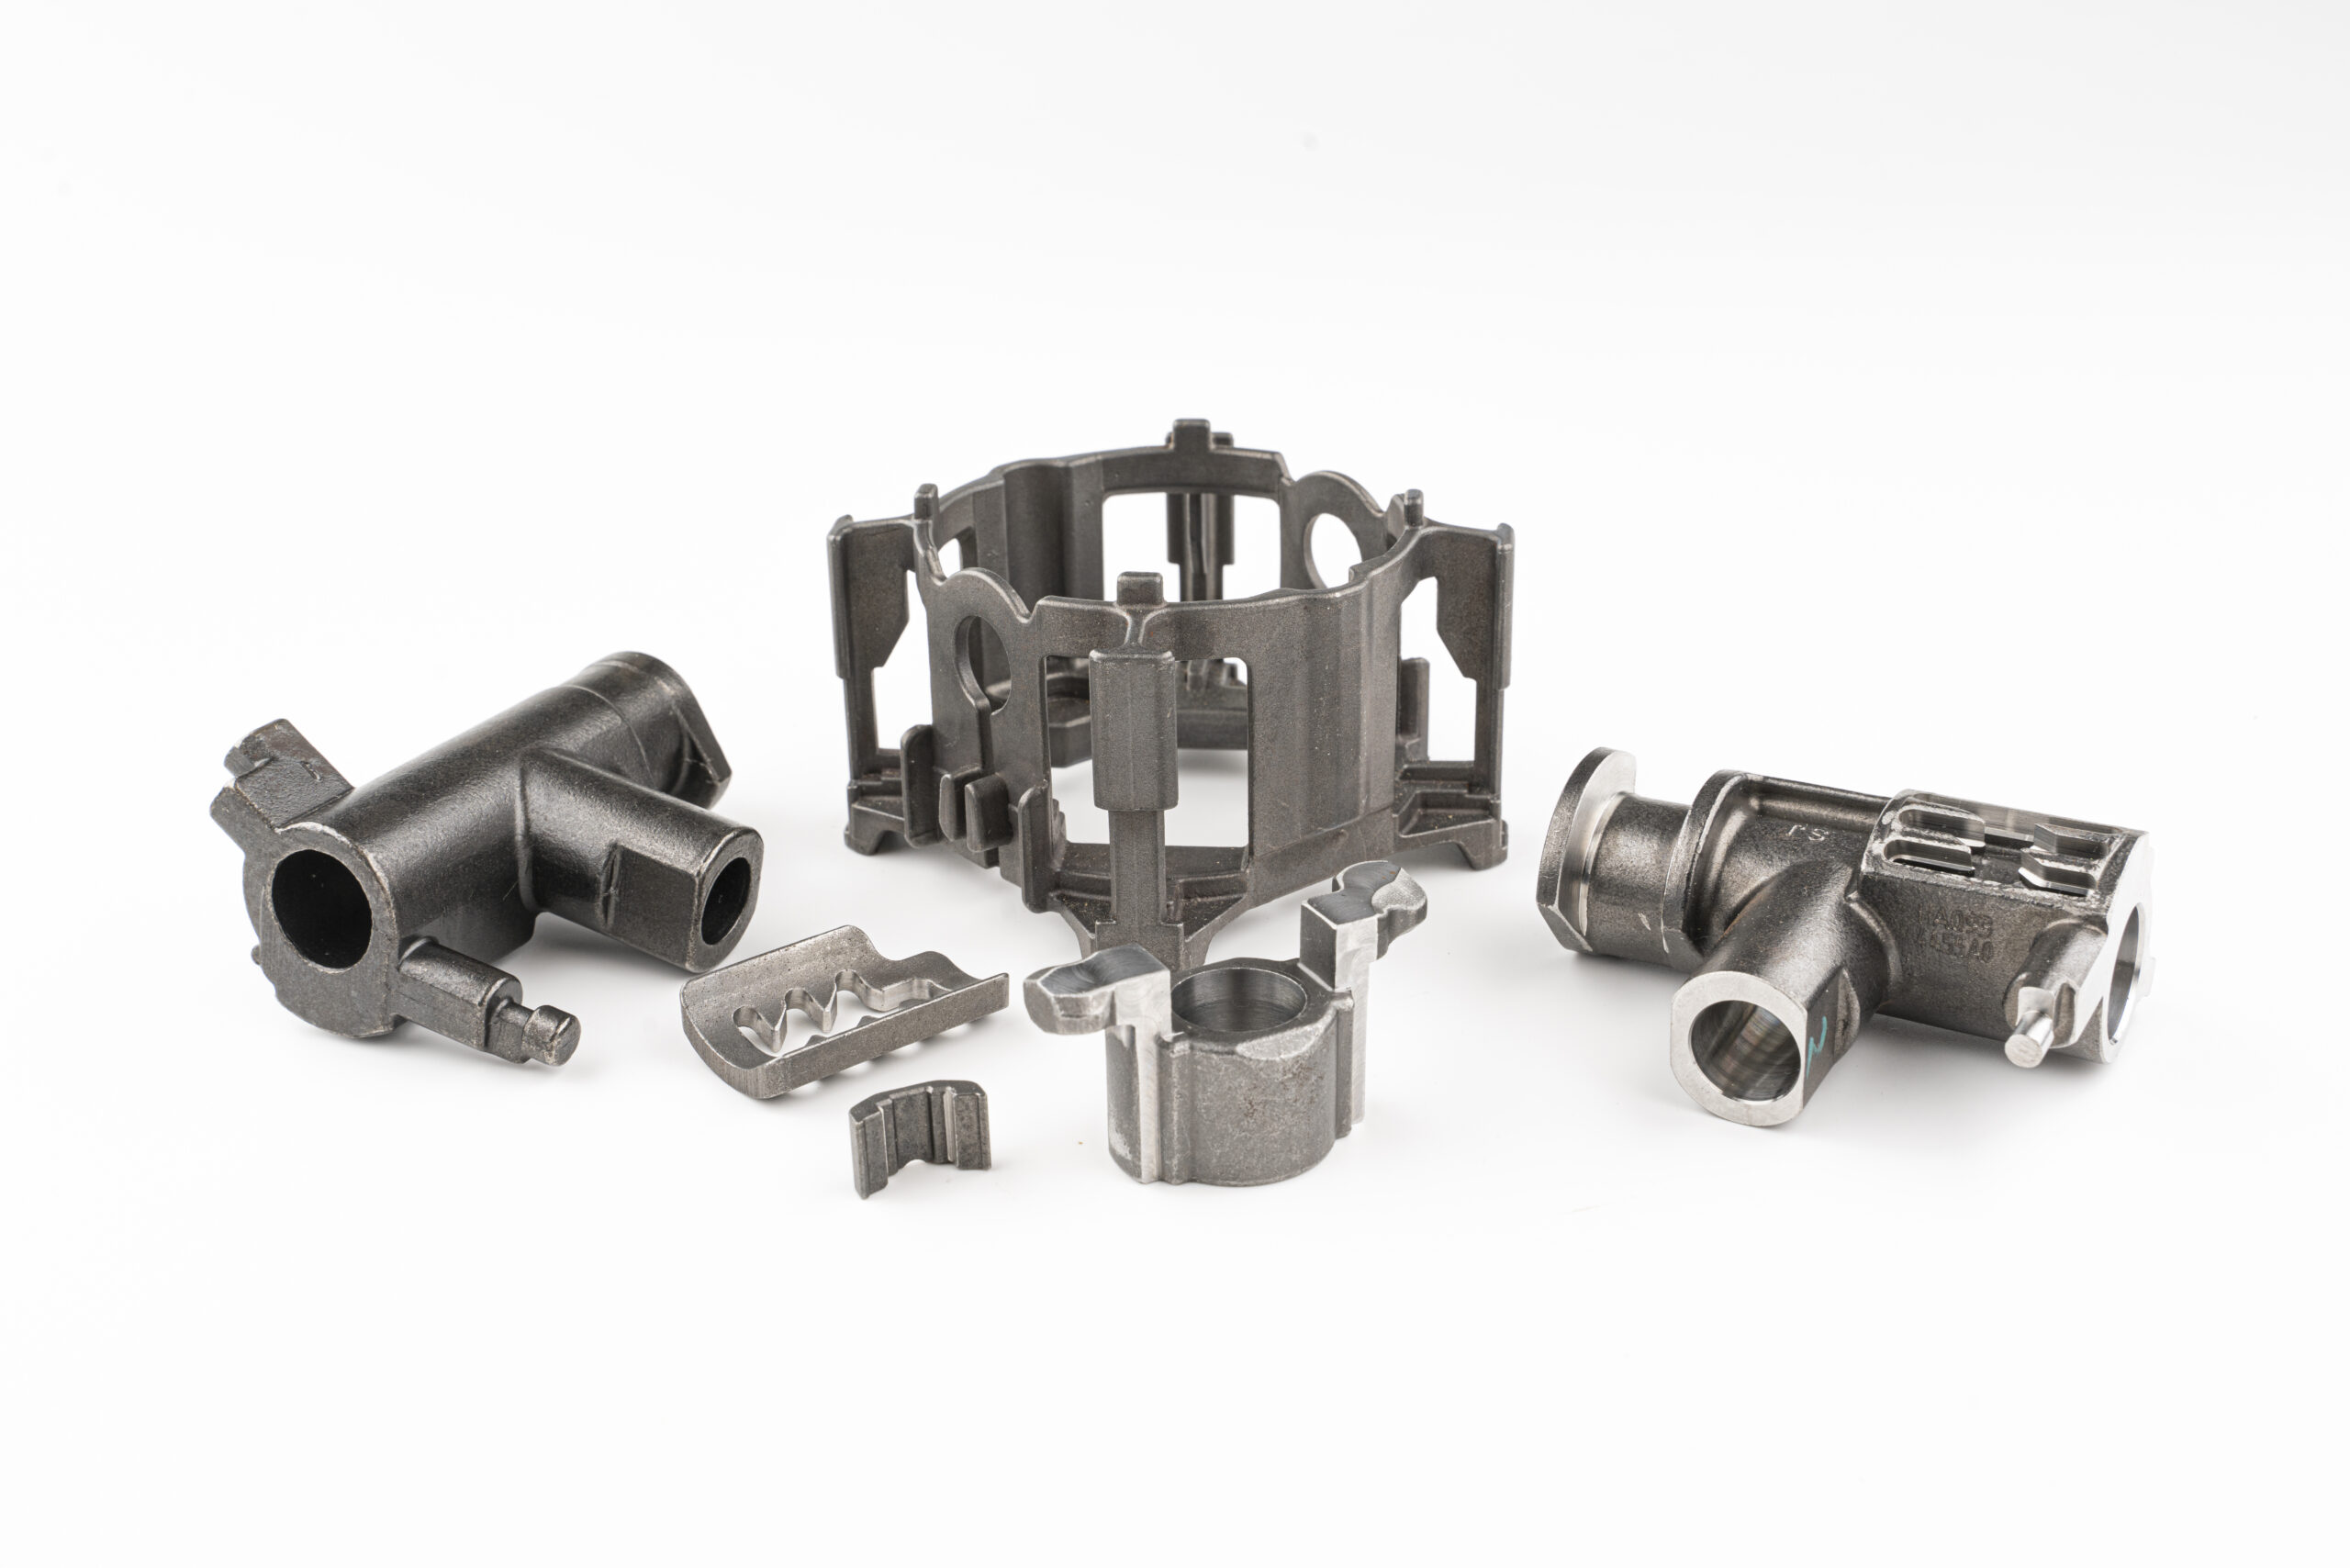 What's the Difference Between Investment Casting and Sand Casting